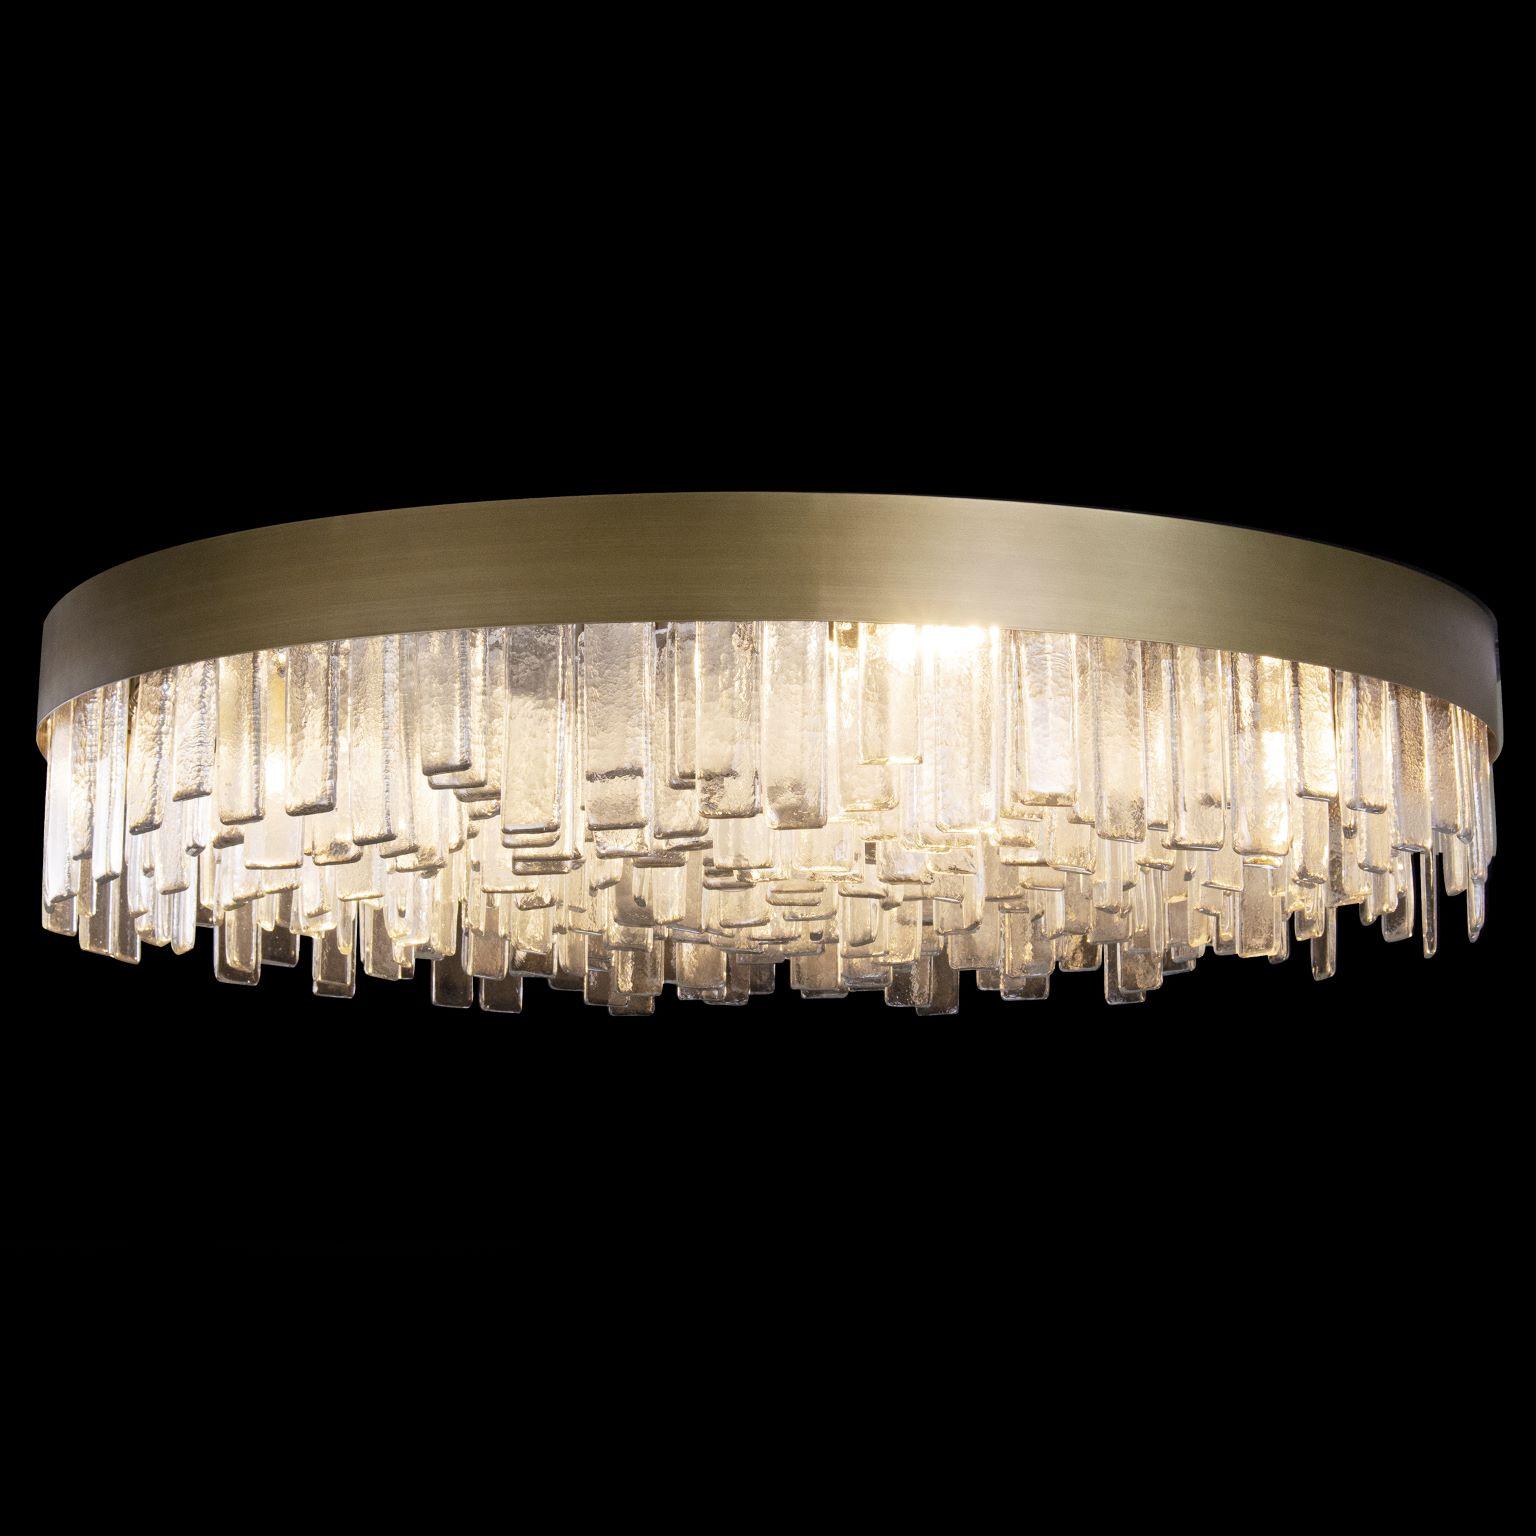 Cosmopolitan ceiling light clear Murano listels, brushed bronze fixture by Multiforme.
The modern style ceiling light Cosmopolitan, from our Progressive collection, is an extremely versatile lighting work that can be customized in many different